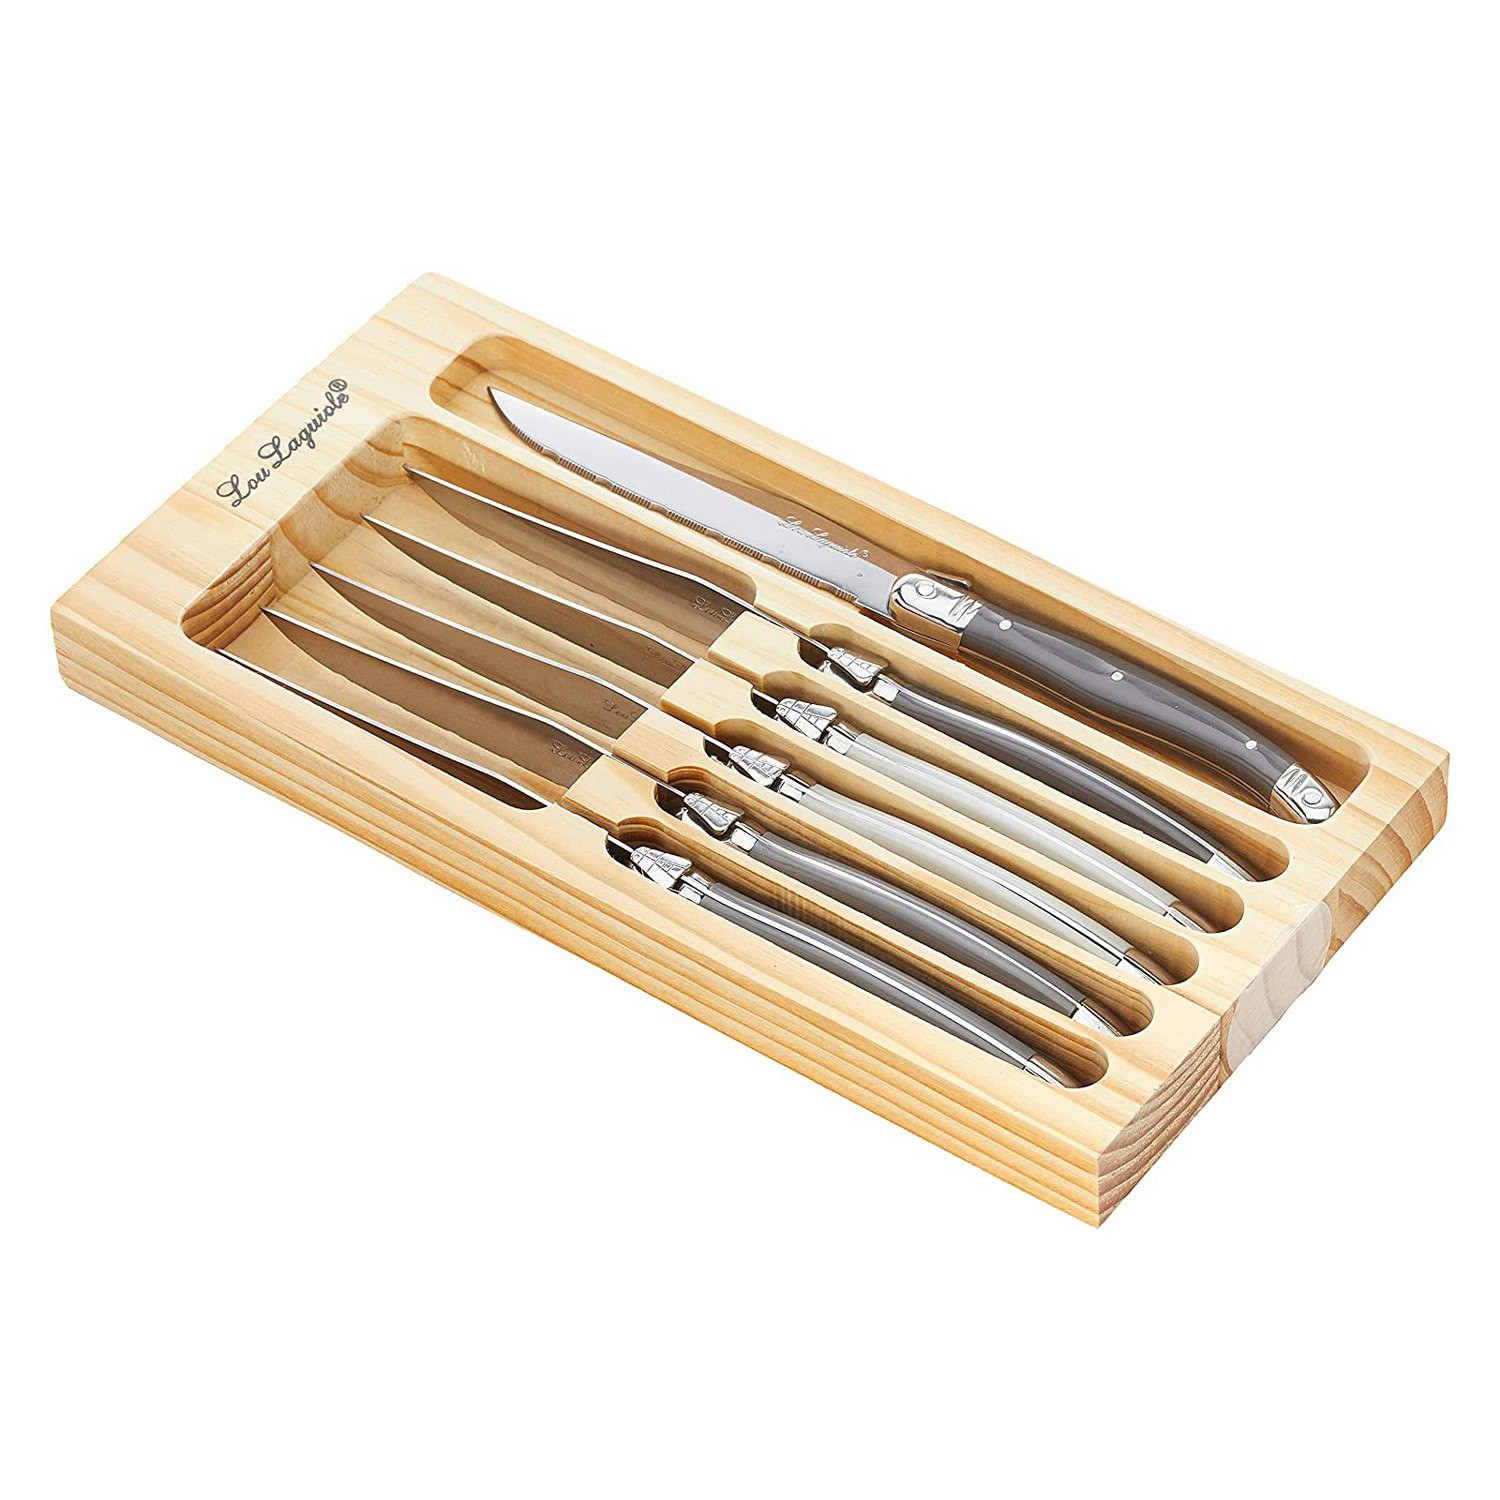 https://royaldesign.com/image/2/lou-laguiole-tradition-grill-knives-with-box-6-pack-0